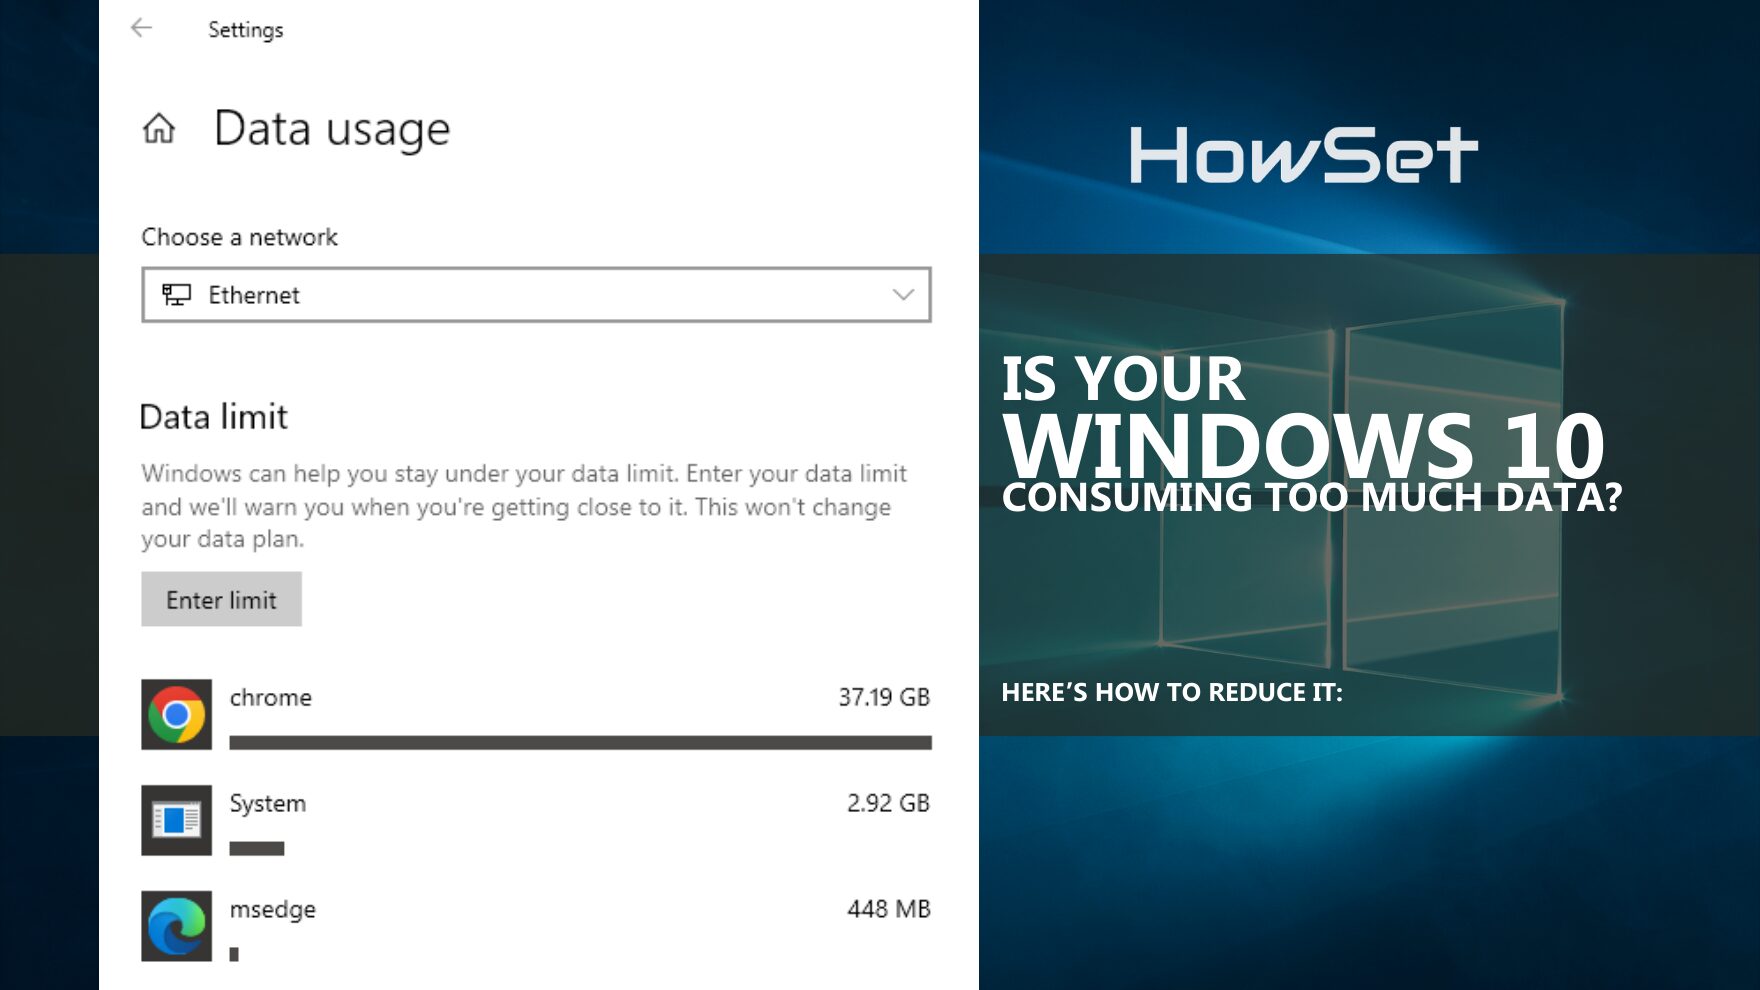 Is Your Windows 10 Consuming Too Much Data Here’s How to Reduce It